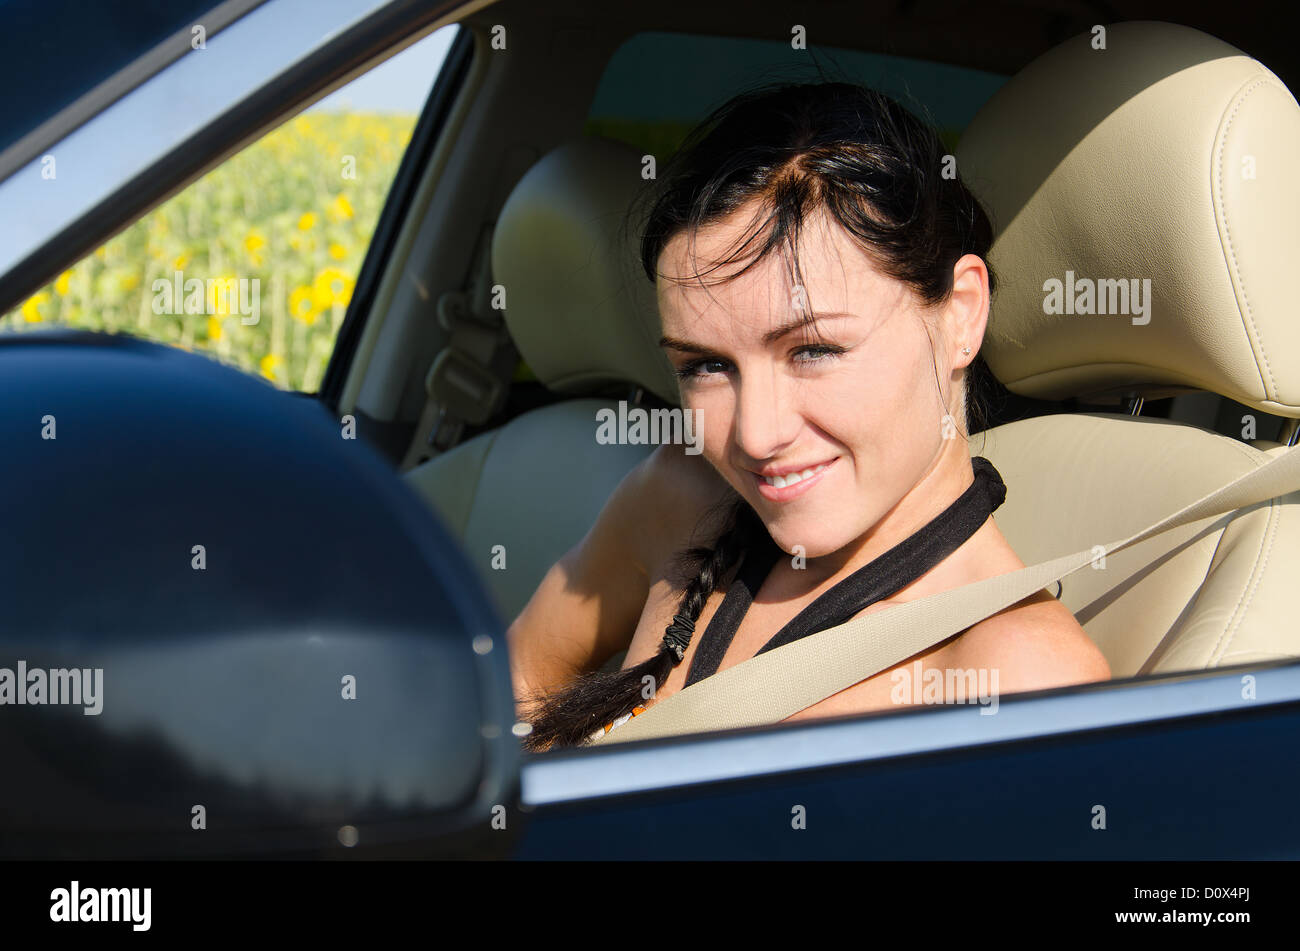 Beautiful smiling young woman wearing a seatbelt seated in a motor car looking out of the window Stock Photo